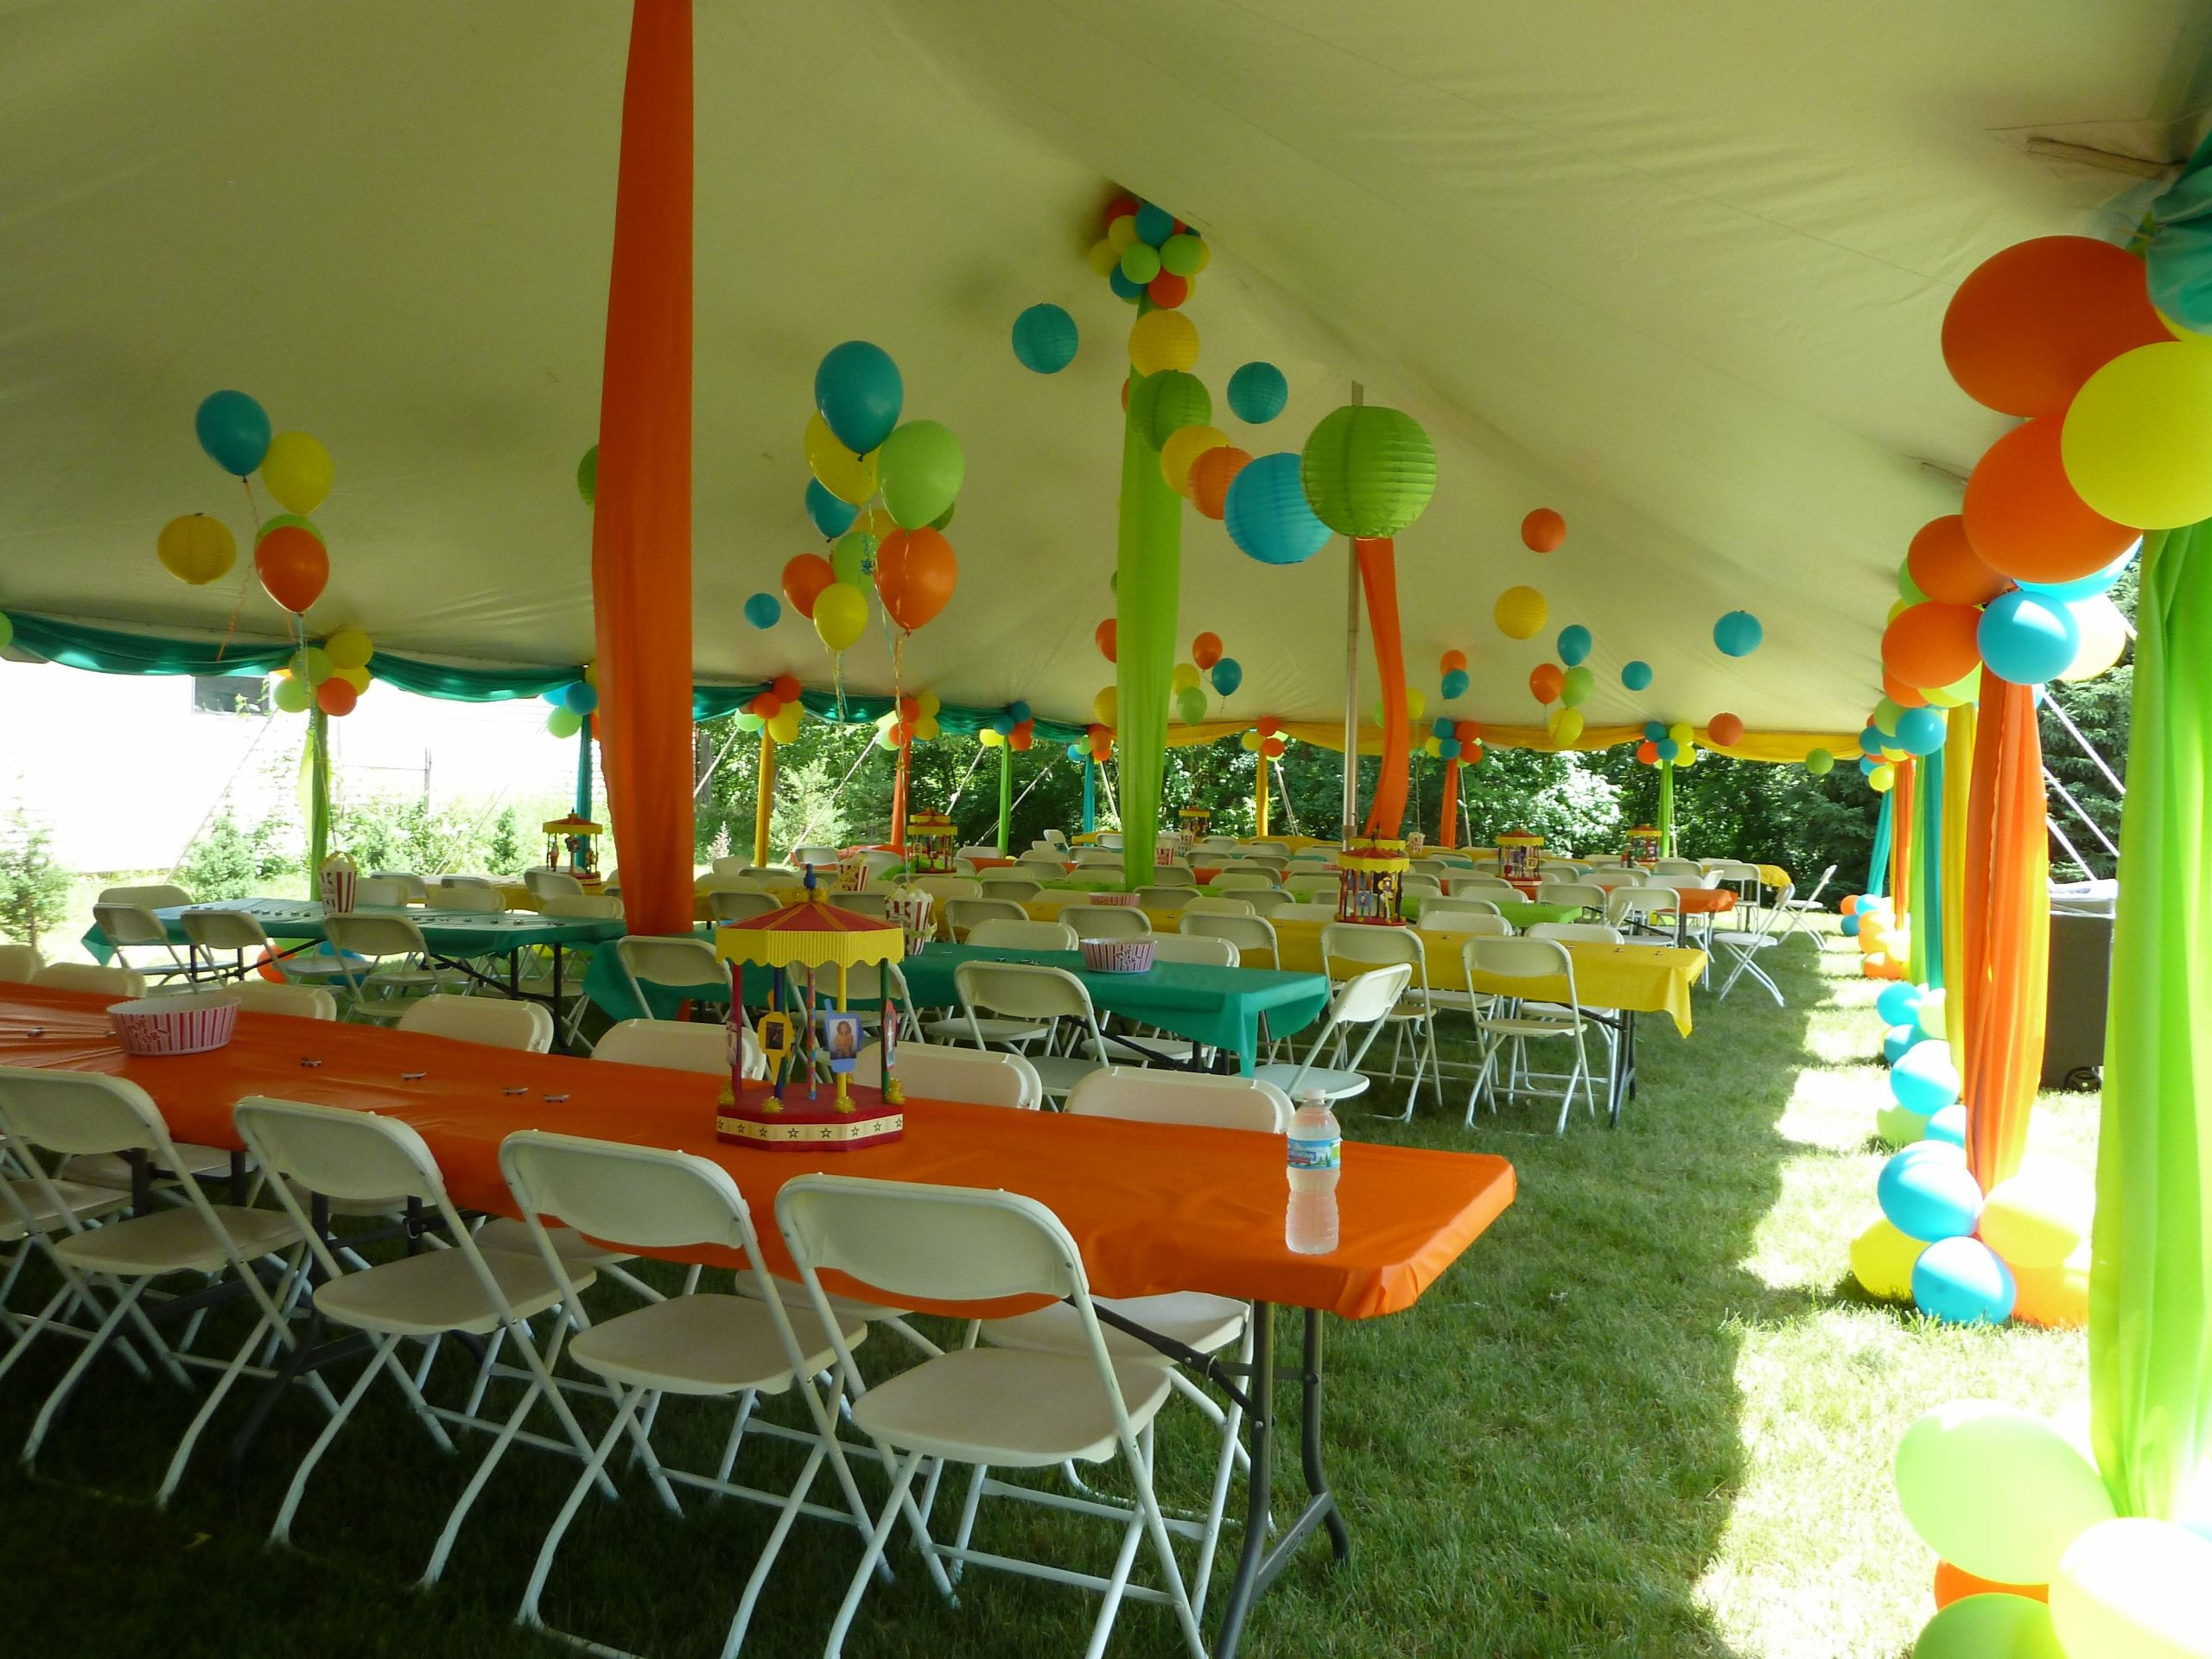 Carnival Themed Graduation Party Ideas
 The 35 Best Ideas for Carnival themed Graduation Party